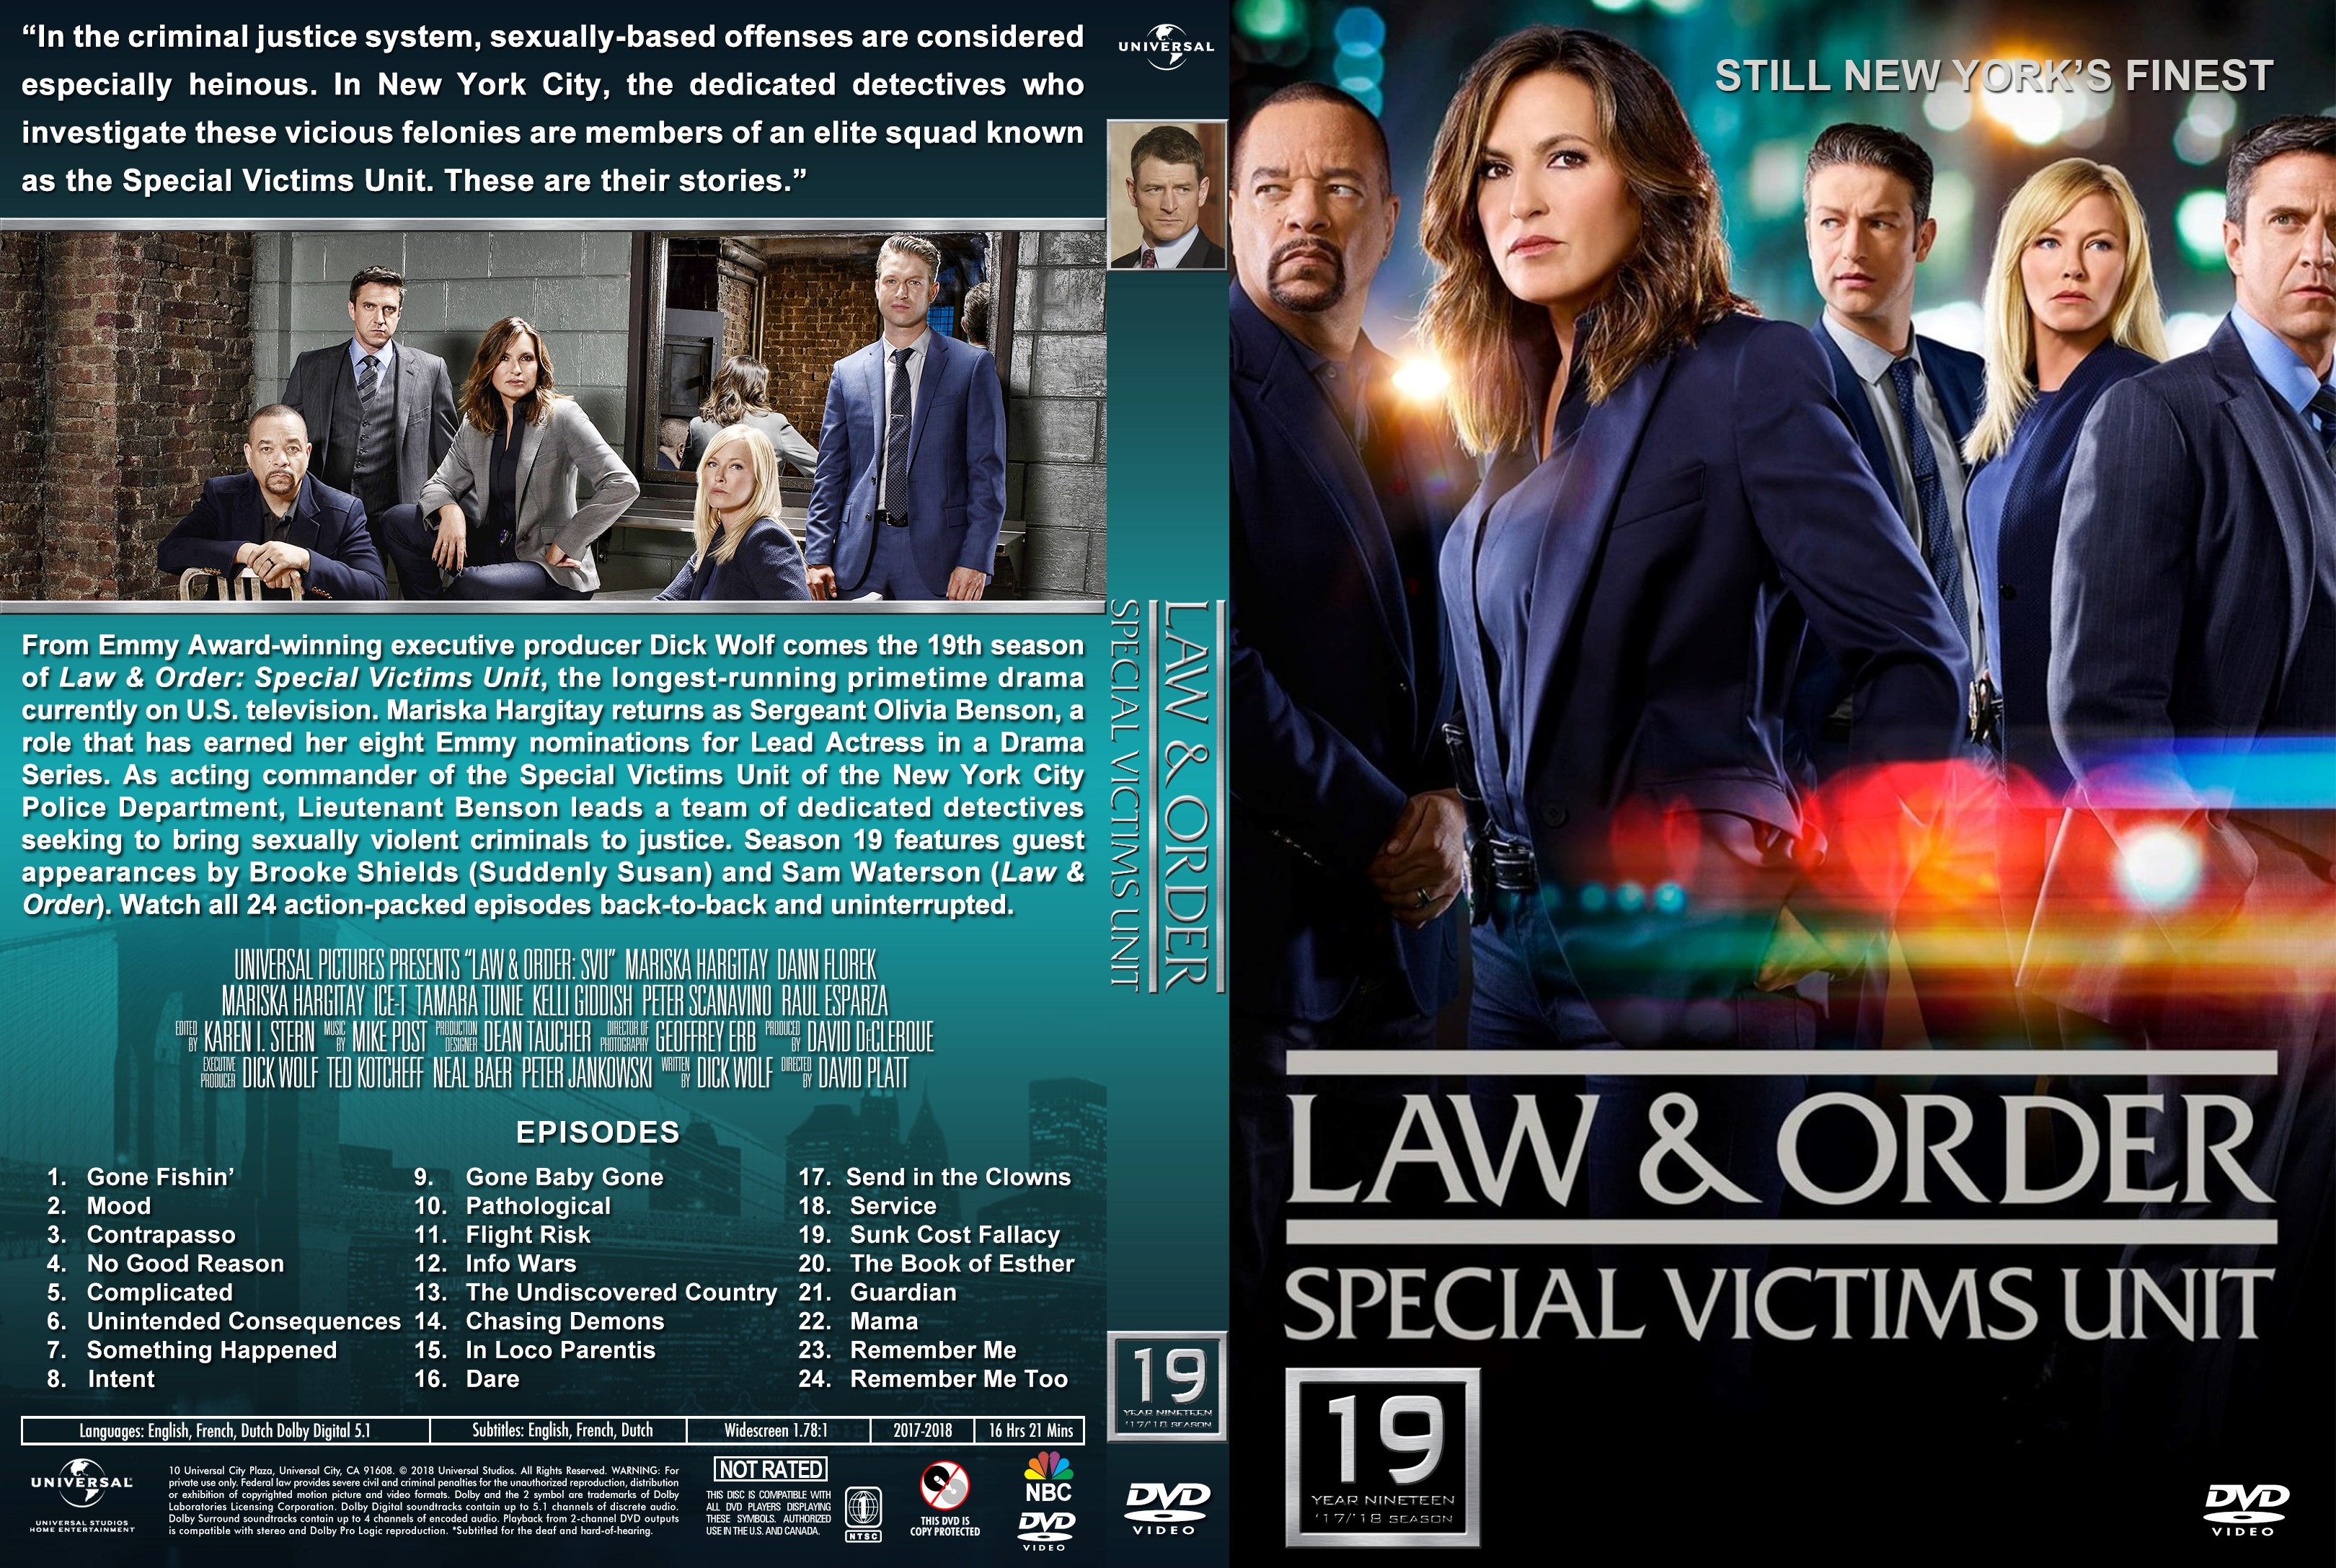 Law & Order: Special Victims Unit Season 19 DVD Cover.